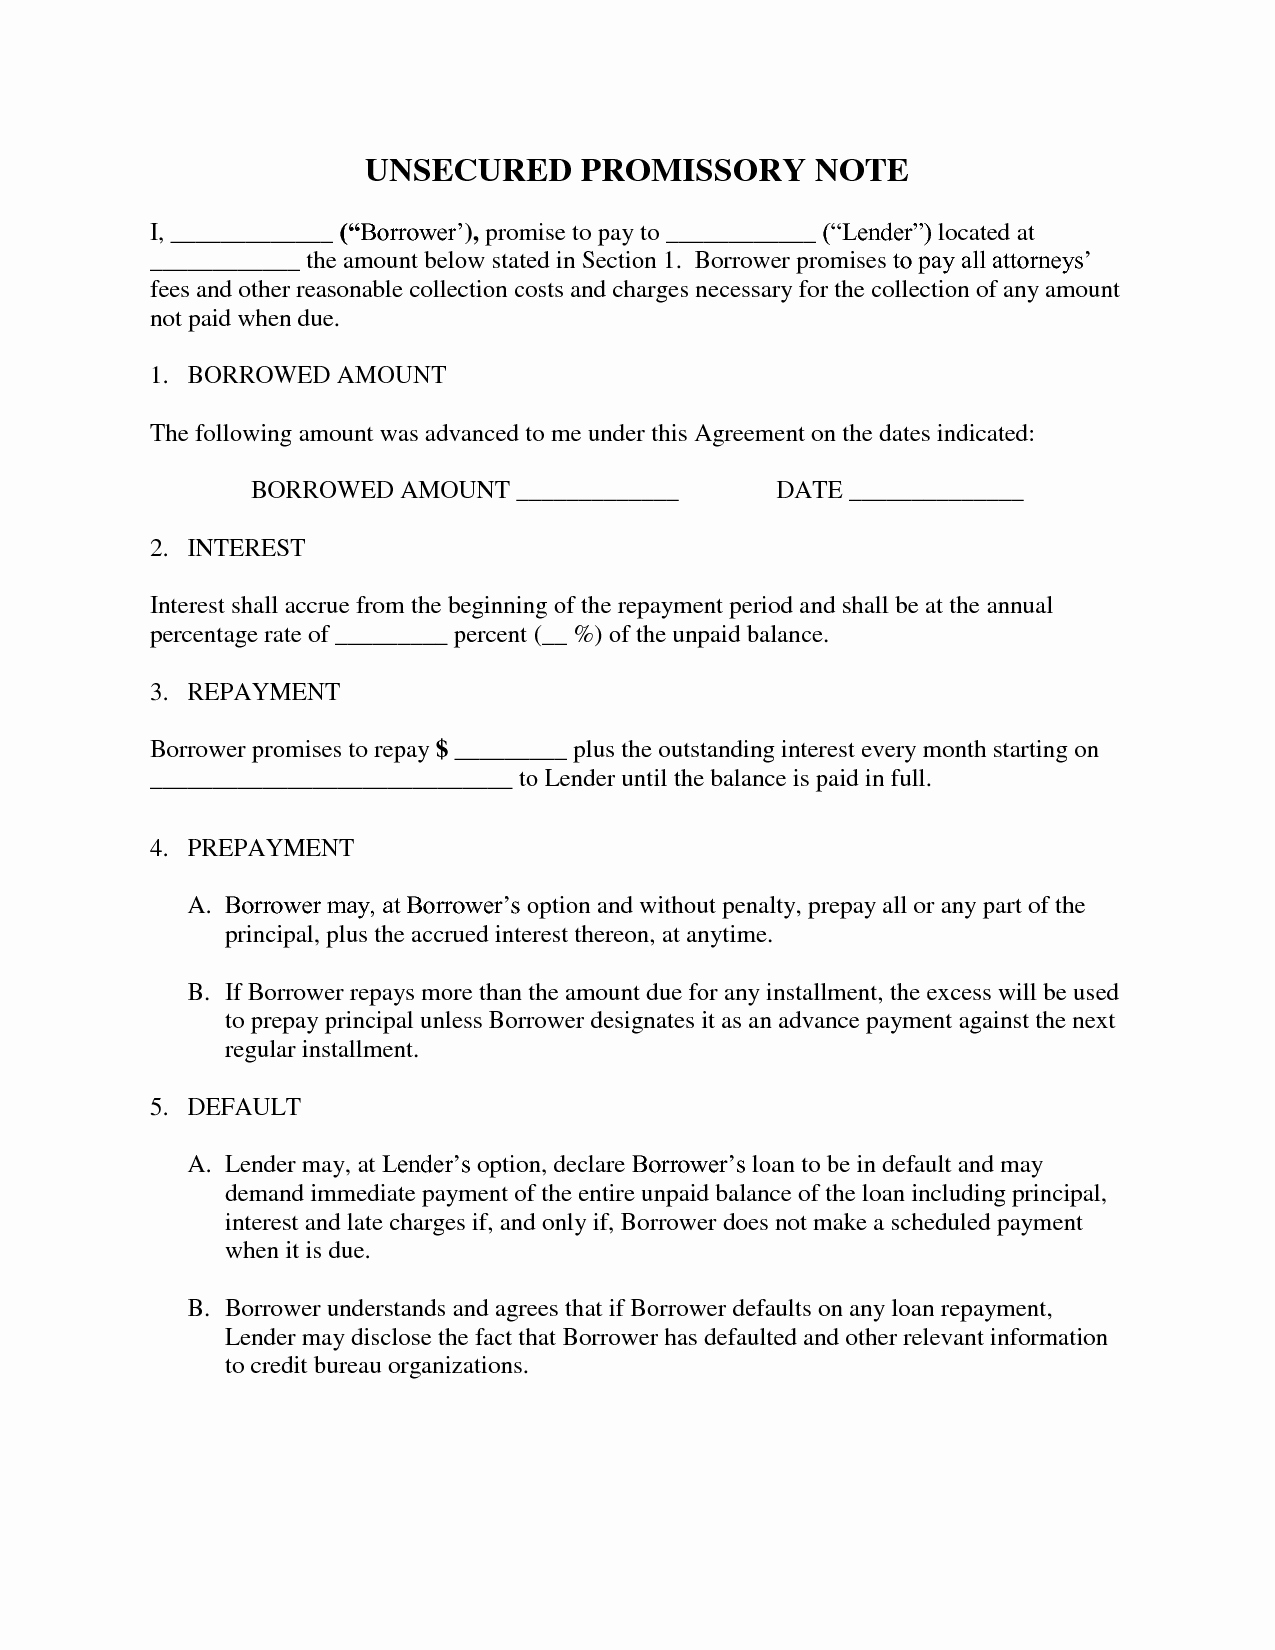 Unsecured Promissory Note Template Lovely Best S Of Free Unsecured Promissory Note Sample